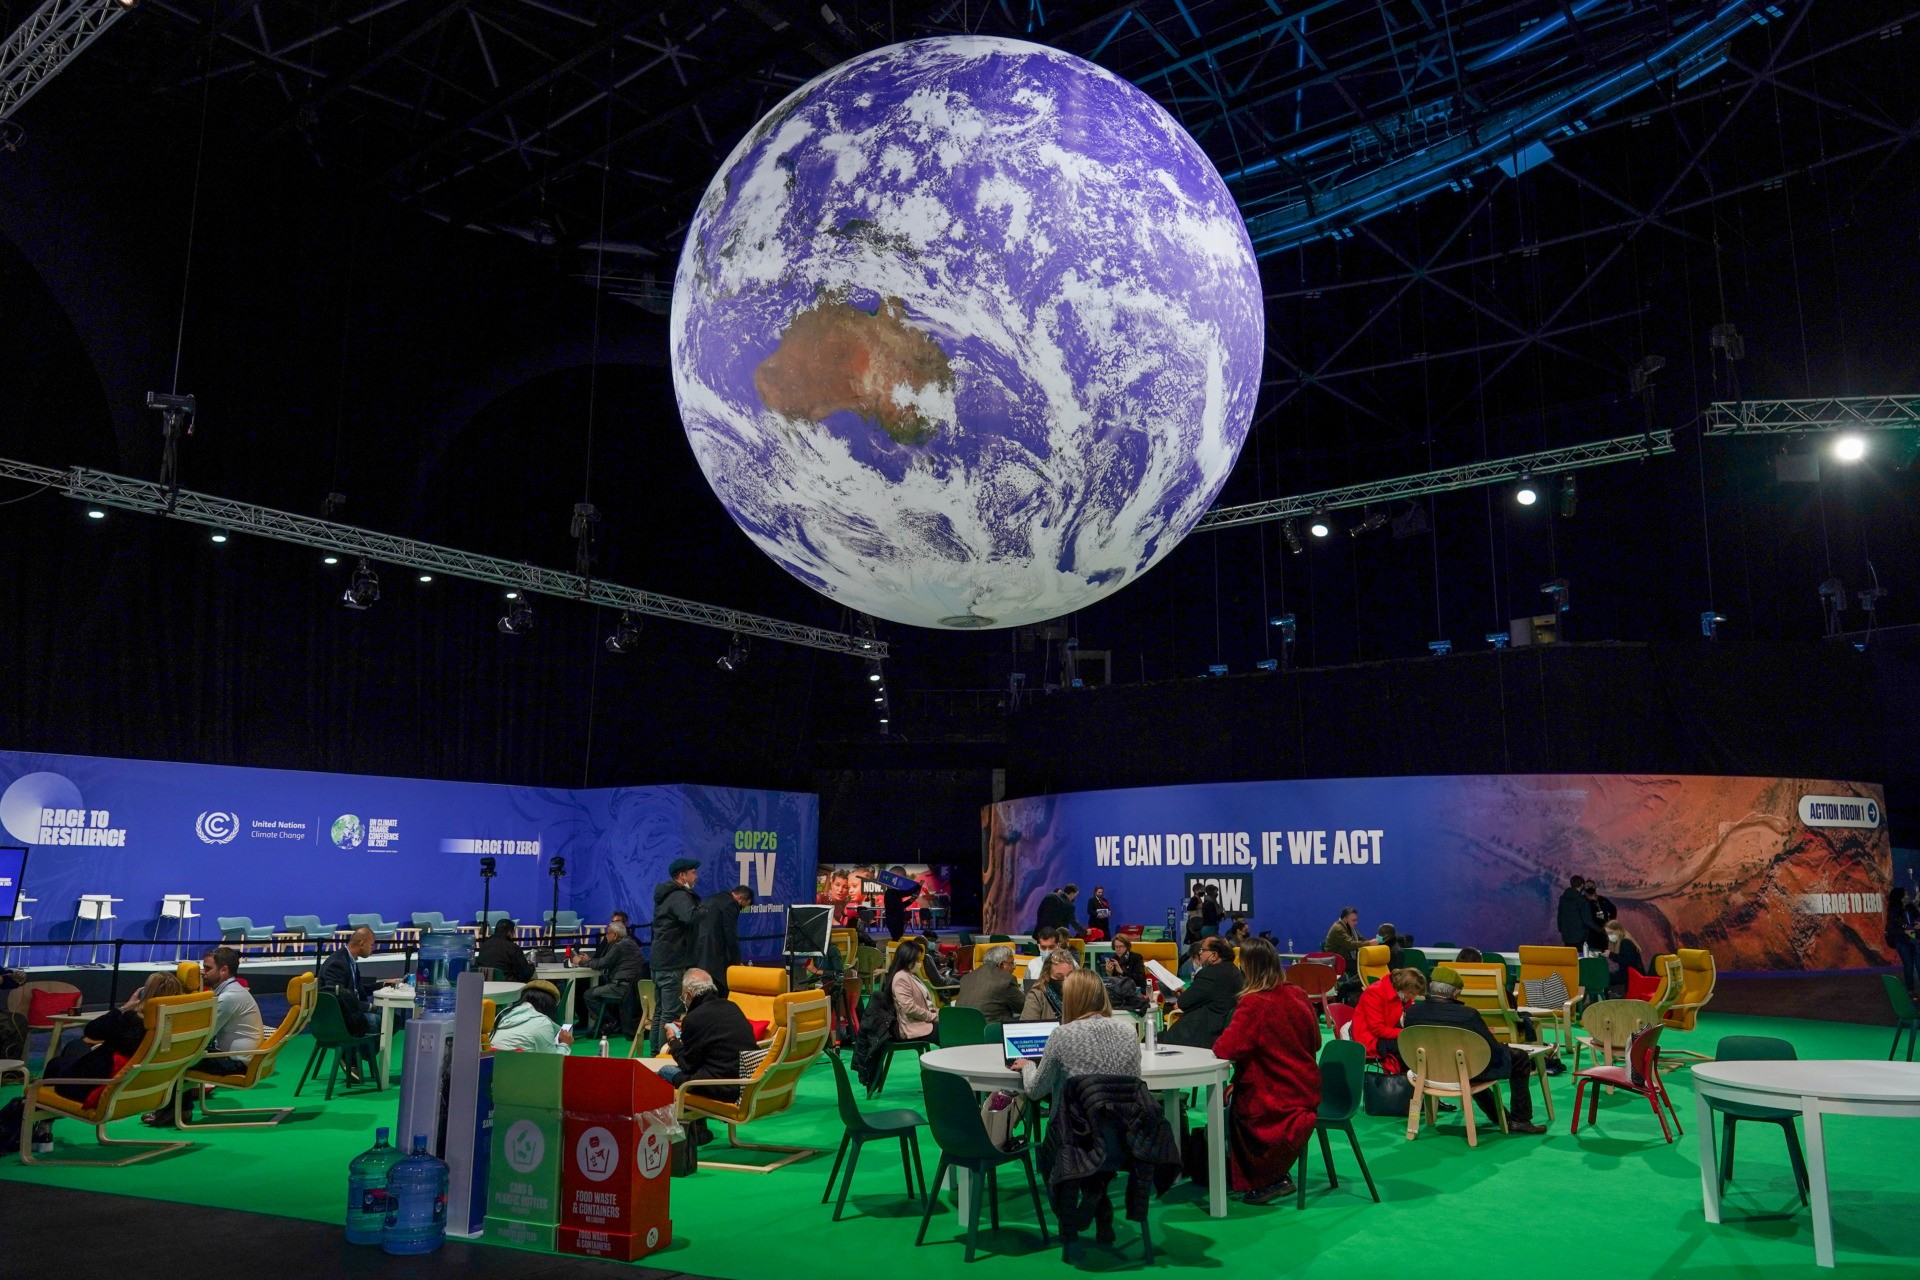 GLASGOW, SCOTLAND - OCTOBER 31: A giant globe hangs from the ceiling as delegates attend on day one of the COP 26 United Nations Climate Change Conference on October 31, 2021 in Glasgow, Scotland. 2021 sees the 26th United Nations Climate Change Conference. The conference will run from 31 October for two weeks, finishing on 12 November. It was meant to take place in 2020 but was delayed due to the Covid-19 pandemic. (Photo by Ian Forsyth/Getty Images)